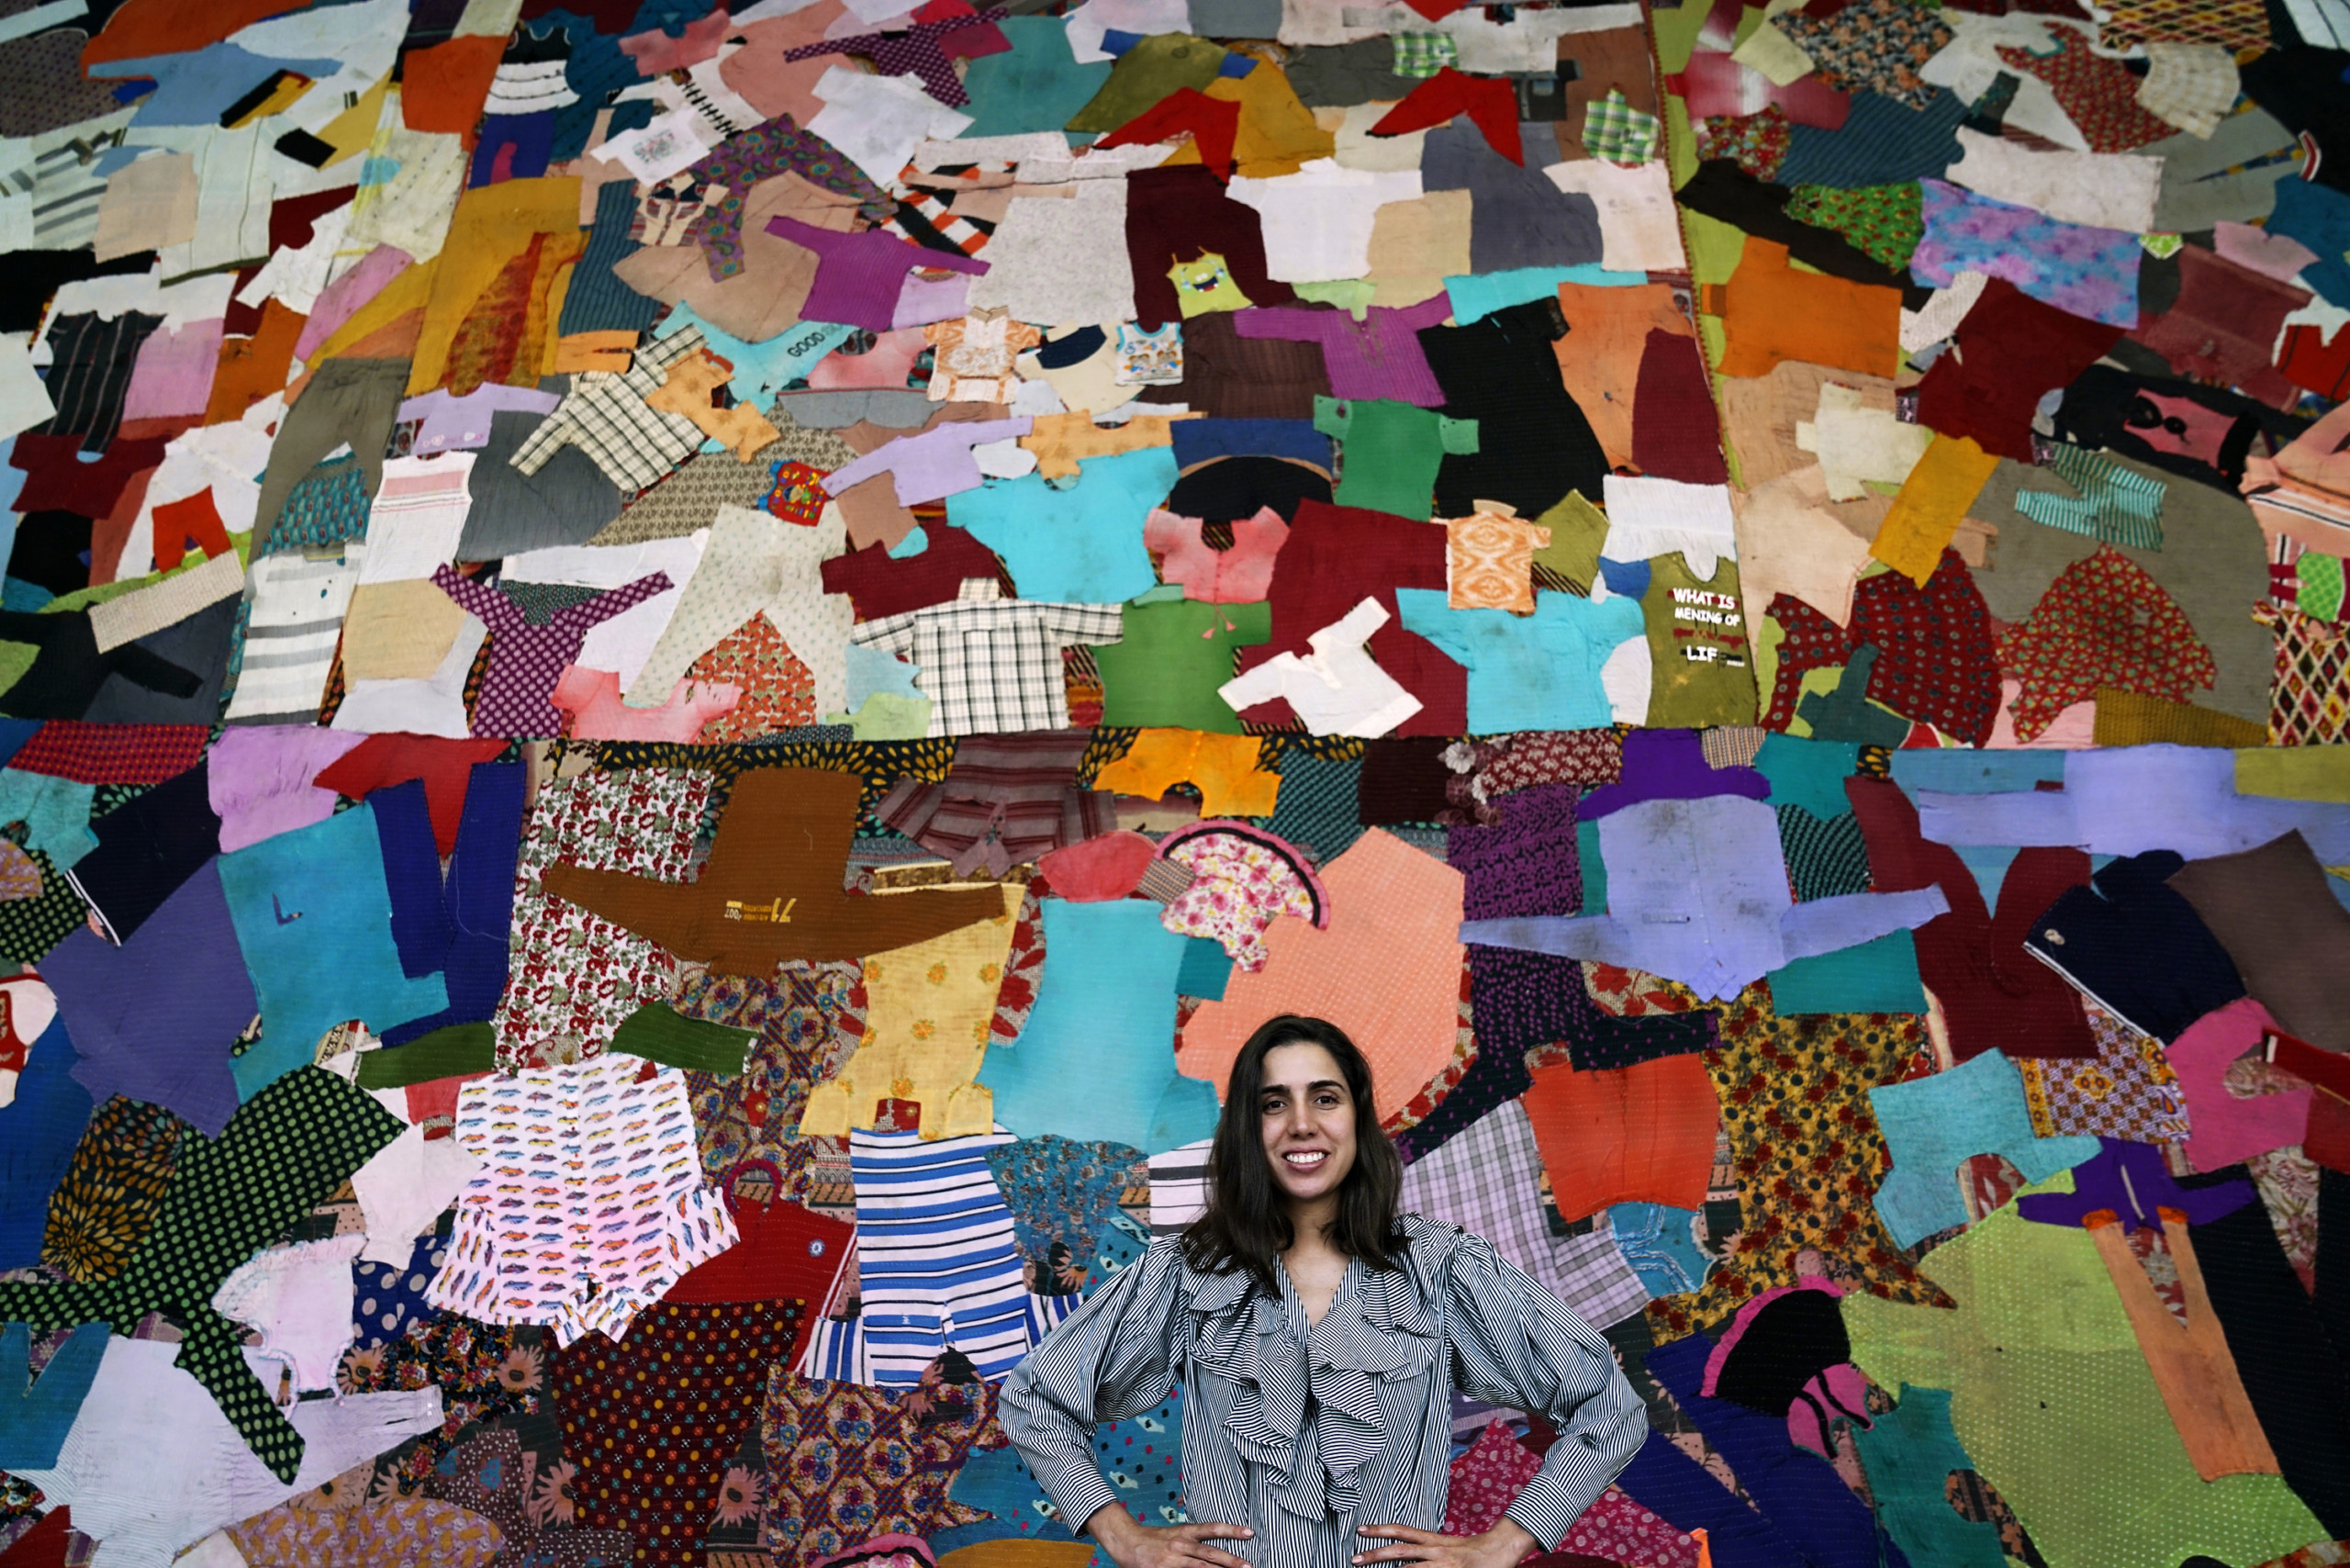 Diana Campbell Betancourt, a light brown-skinned person with shoulder-length brown hair is standing in front of a colourful backdrop comprising of a patchwork of textiles and shirts. Framed from the waist up, Diana is wearing a shirt with white and green stripes. Diana is looking into the camera and smiling while holding her hands on her waist.